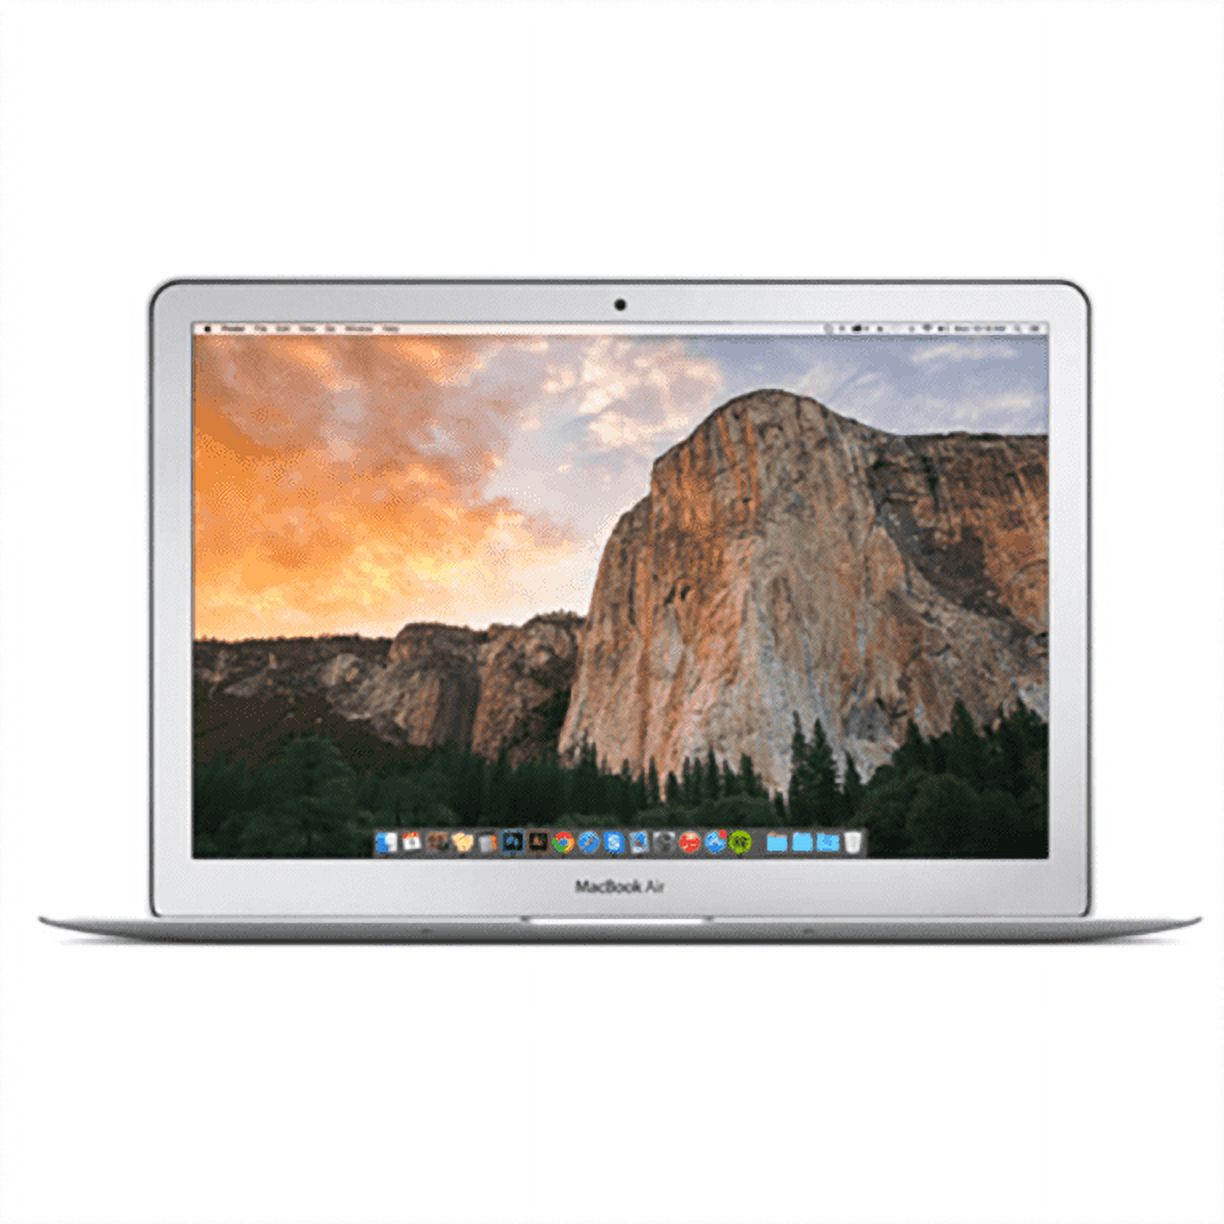 Pre-Owned Apple Macbook Air 13" i5 2012 [1.8] [128GB] [4GB] MD231LL/A (Refurbished: Good) - image 1 of 4